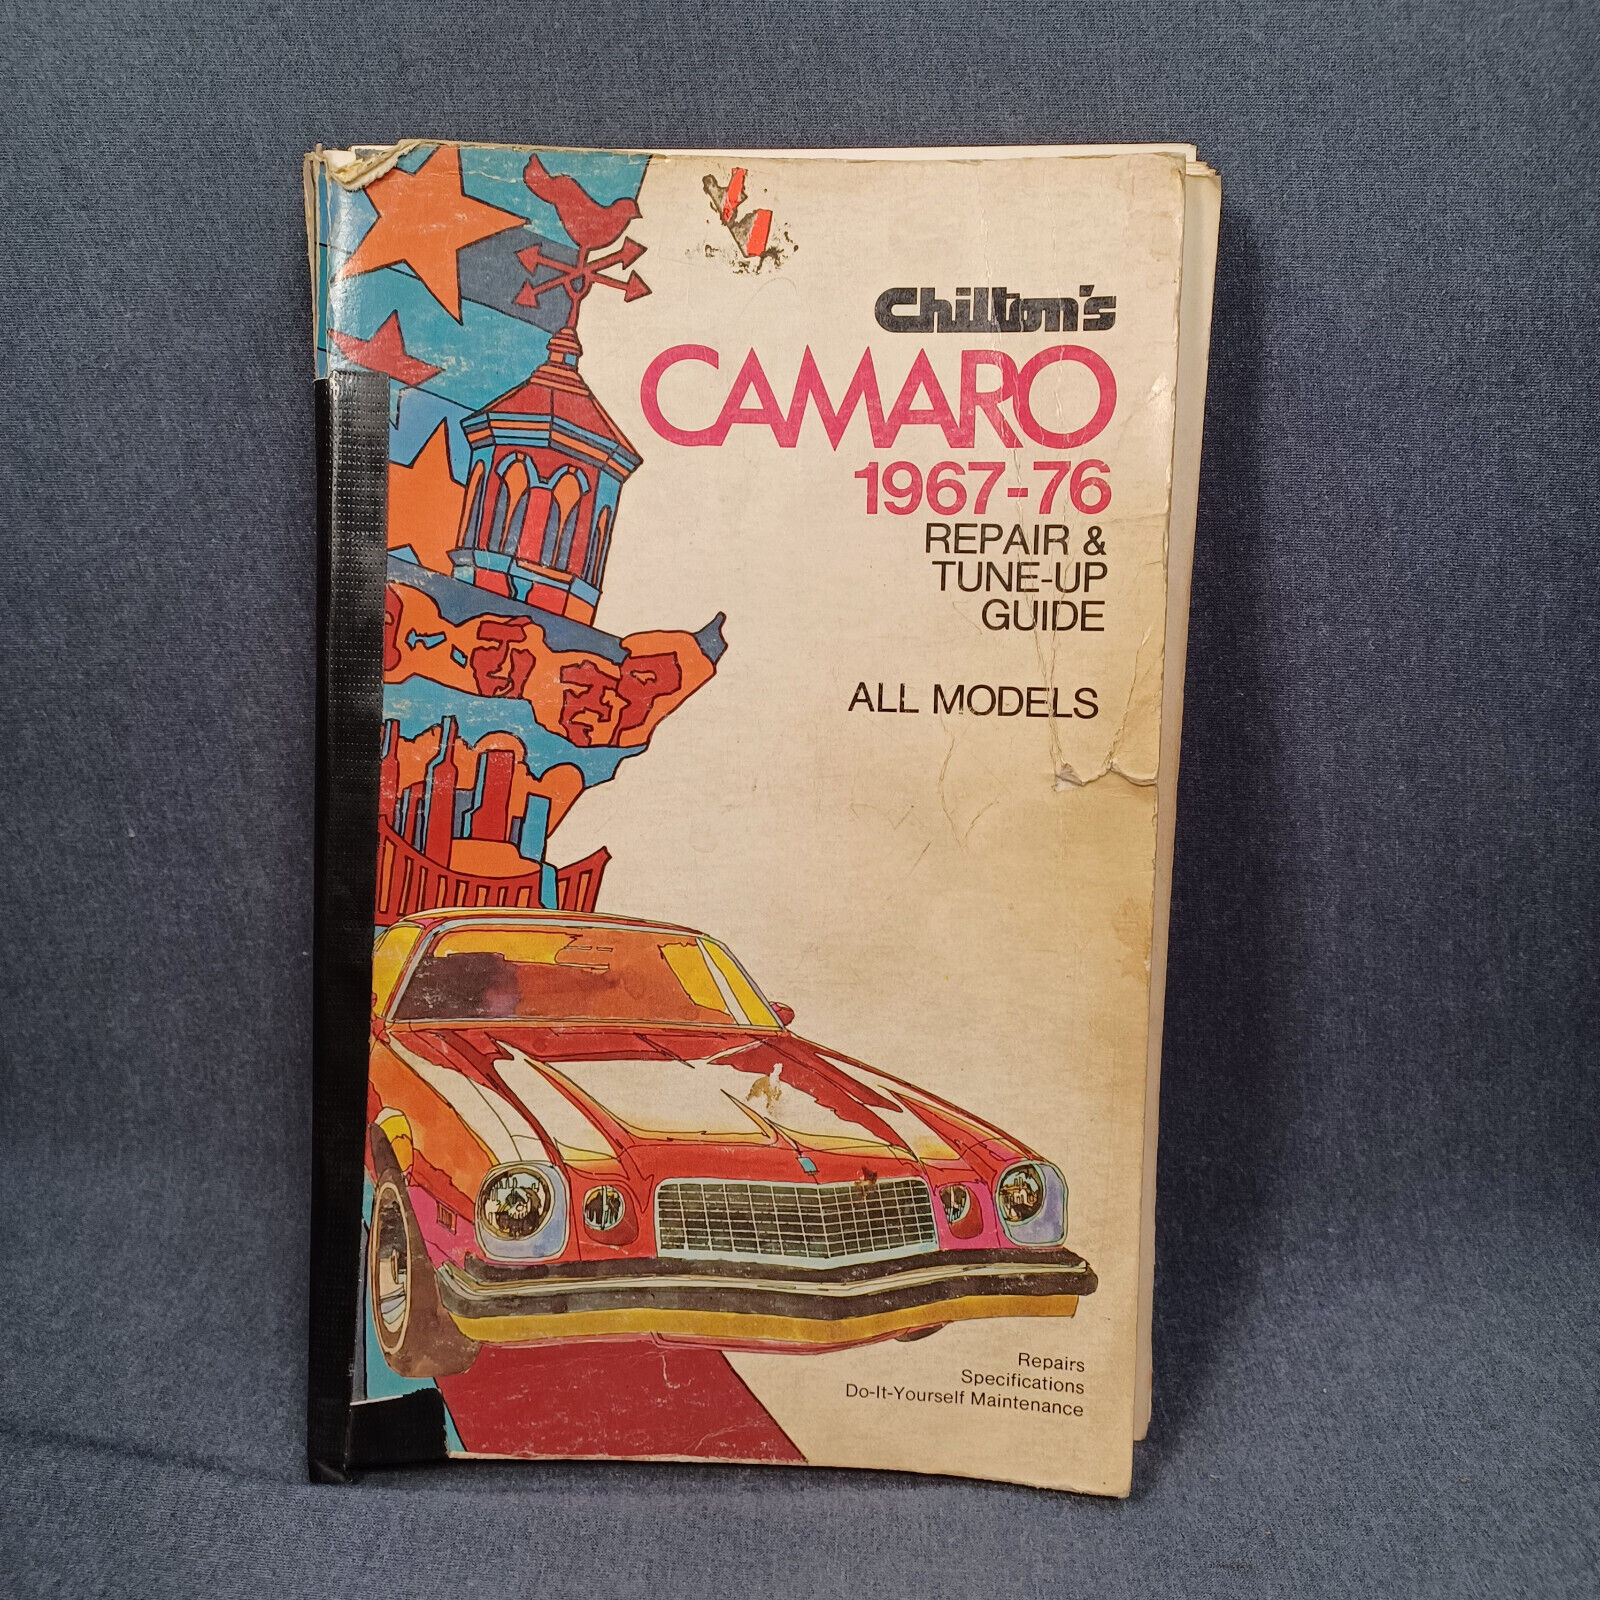 Vintage Chilton's CAMARO 1967-76 Repair & Tune-up Guide All Models  / Prop